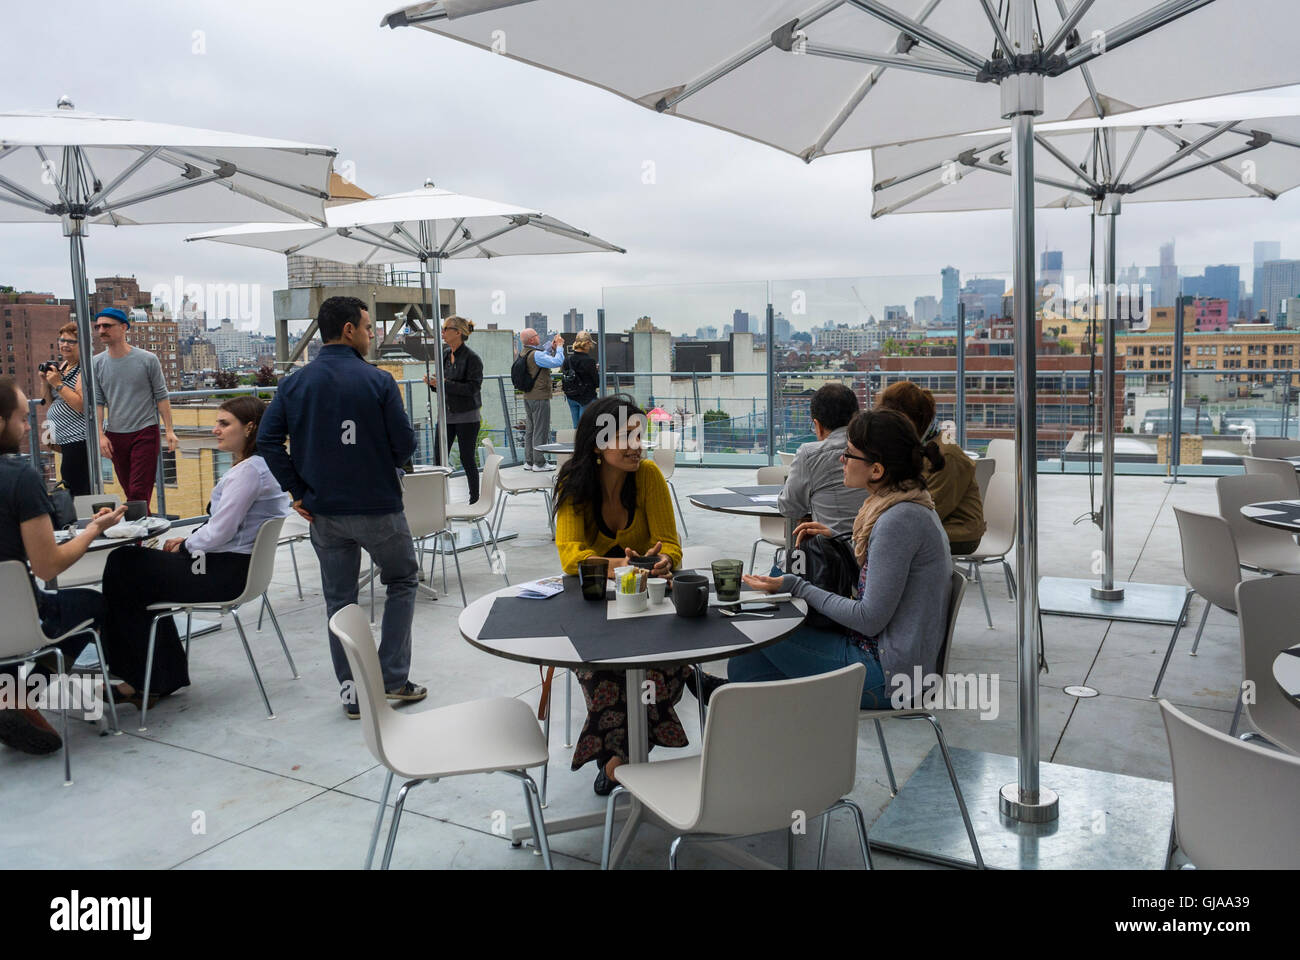 New York, NY, USA, Tourists Sharing Meals in American Bistro Café Restaurant, Modern American Art Musuem, 'Downtown Whitney Museum', modern design restaurant outdoor dining Stock Photo